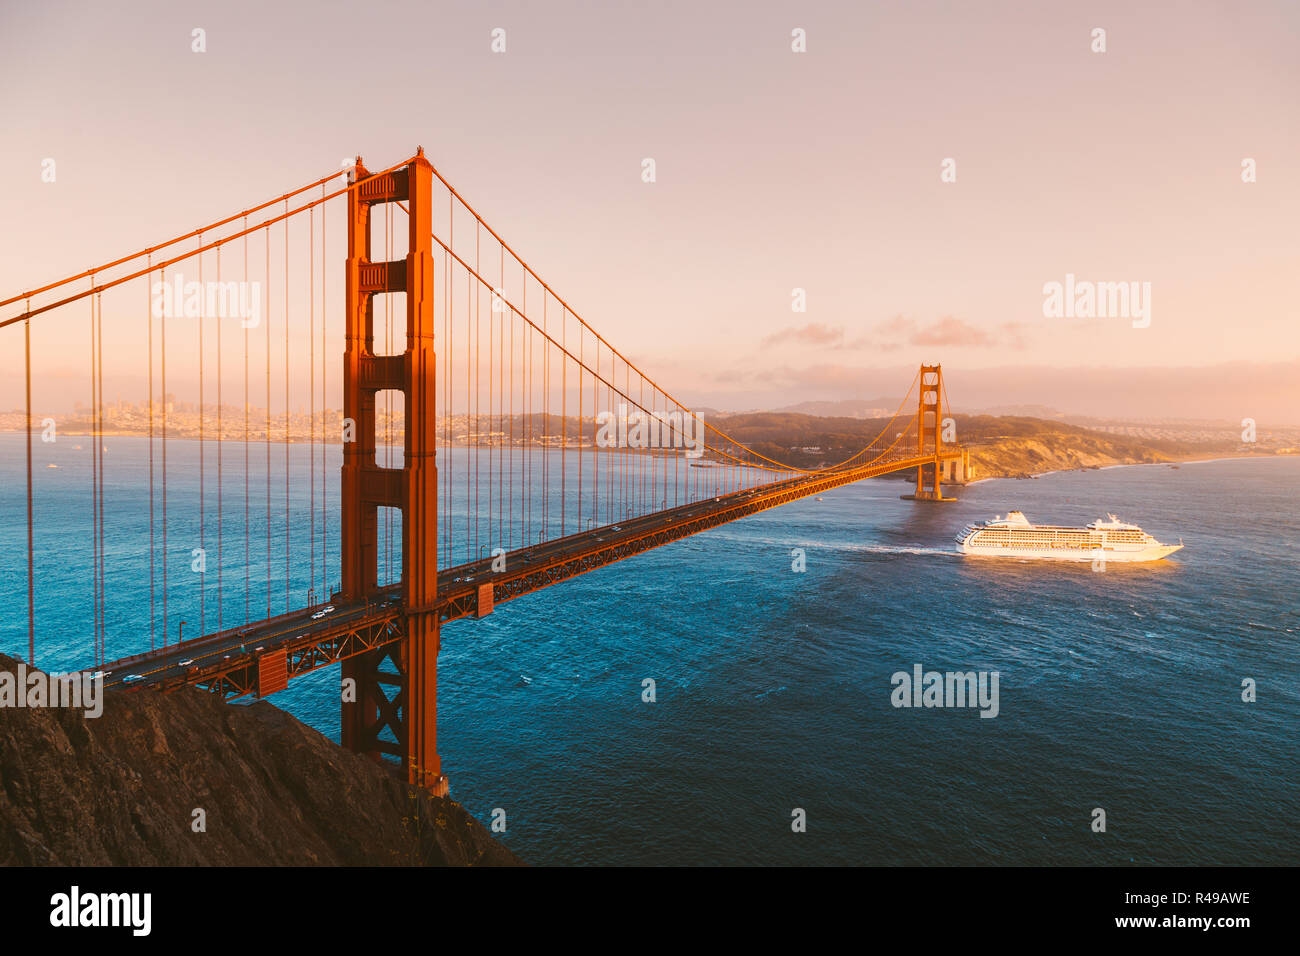 Beautiful panorama view of cruise ship passing famous Golden Gate Bridge with the skyline of San Francisco in the background at sunset, California, US Stock Photo